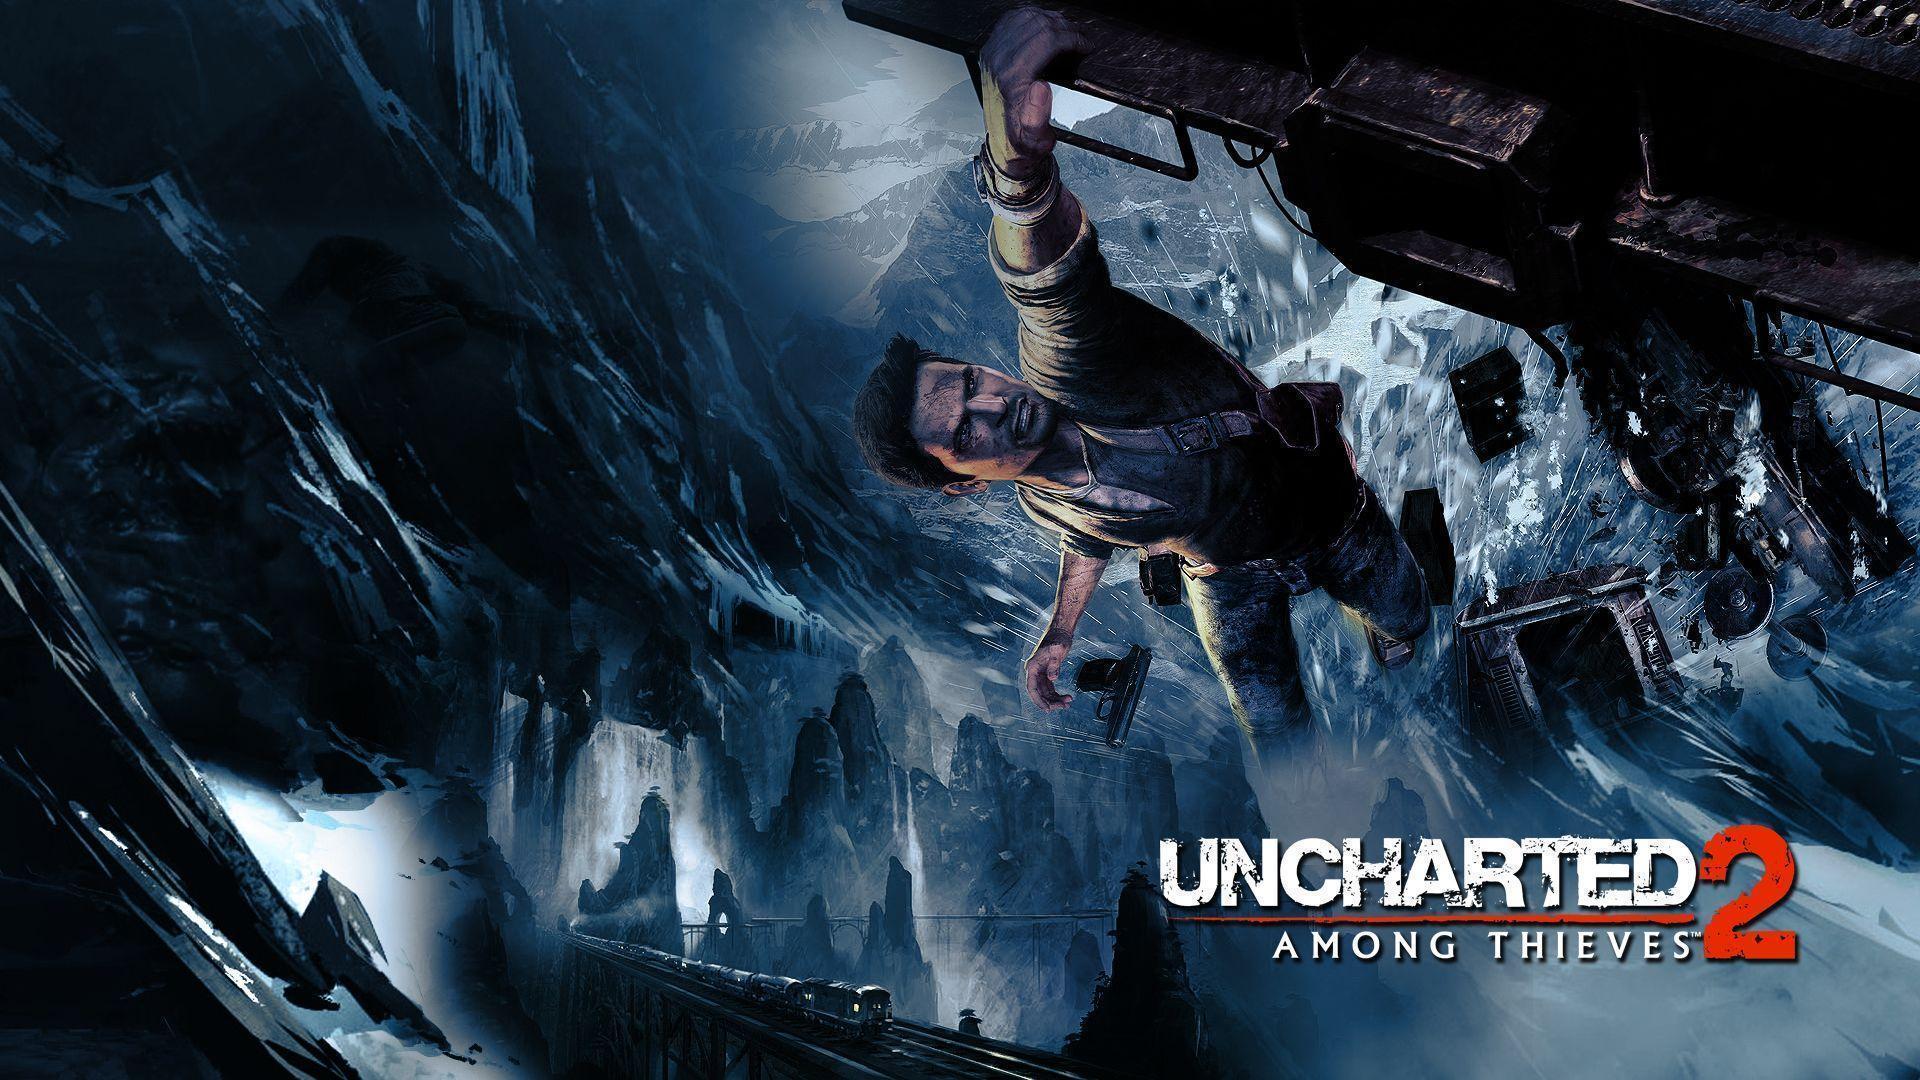 Uncharted 2 Among Thieves Hd Wallpaper 4k For Pc, Uncharted 2 Among Thieves, Game